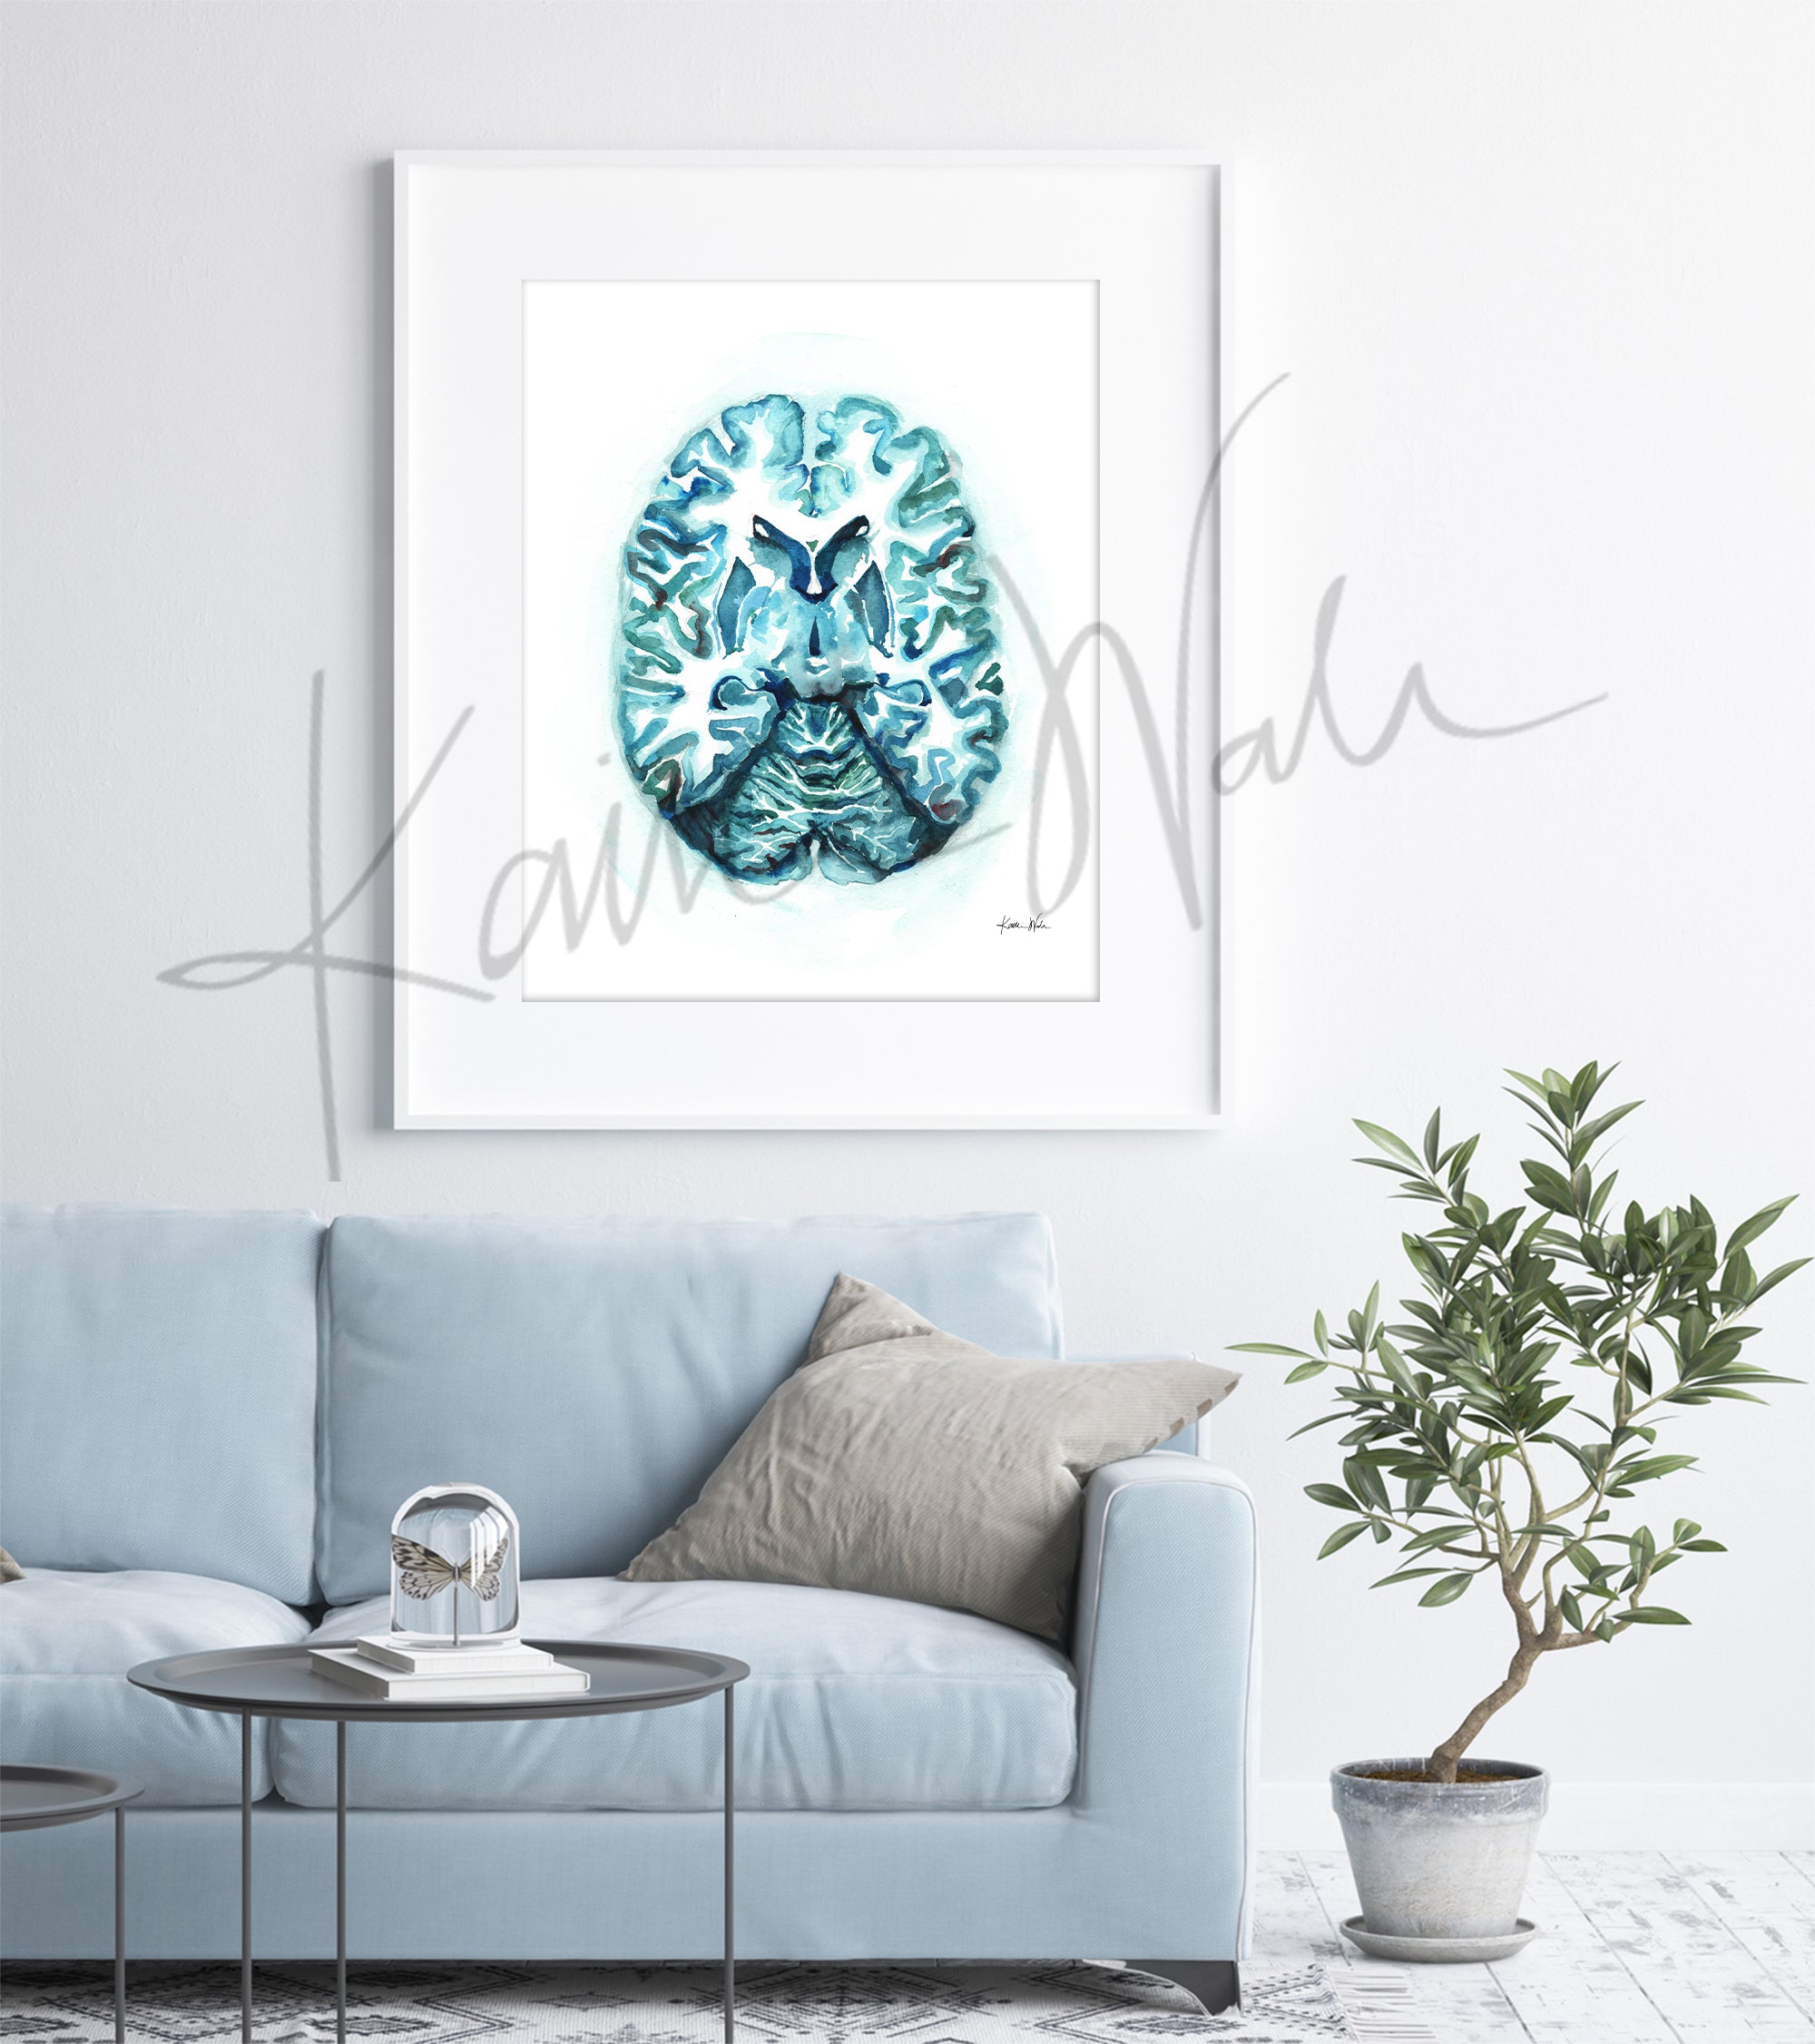 Framed watercolor painting showing a teal and blue transverse cut of the brain. The painting is hanging over a blue couch.